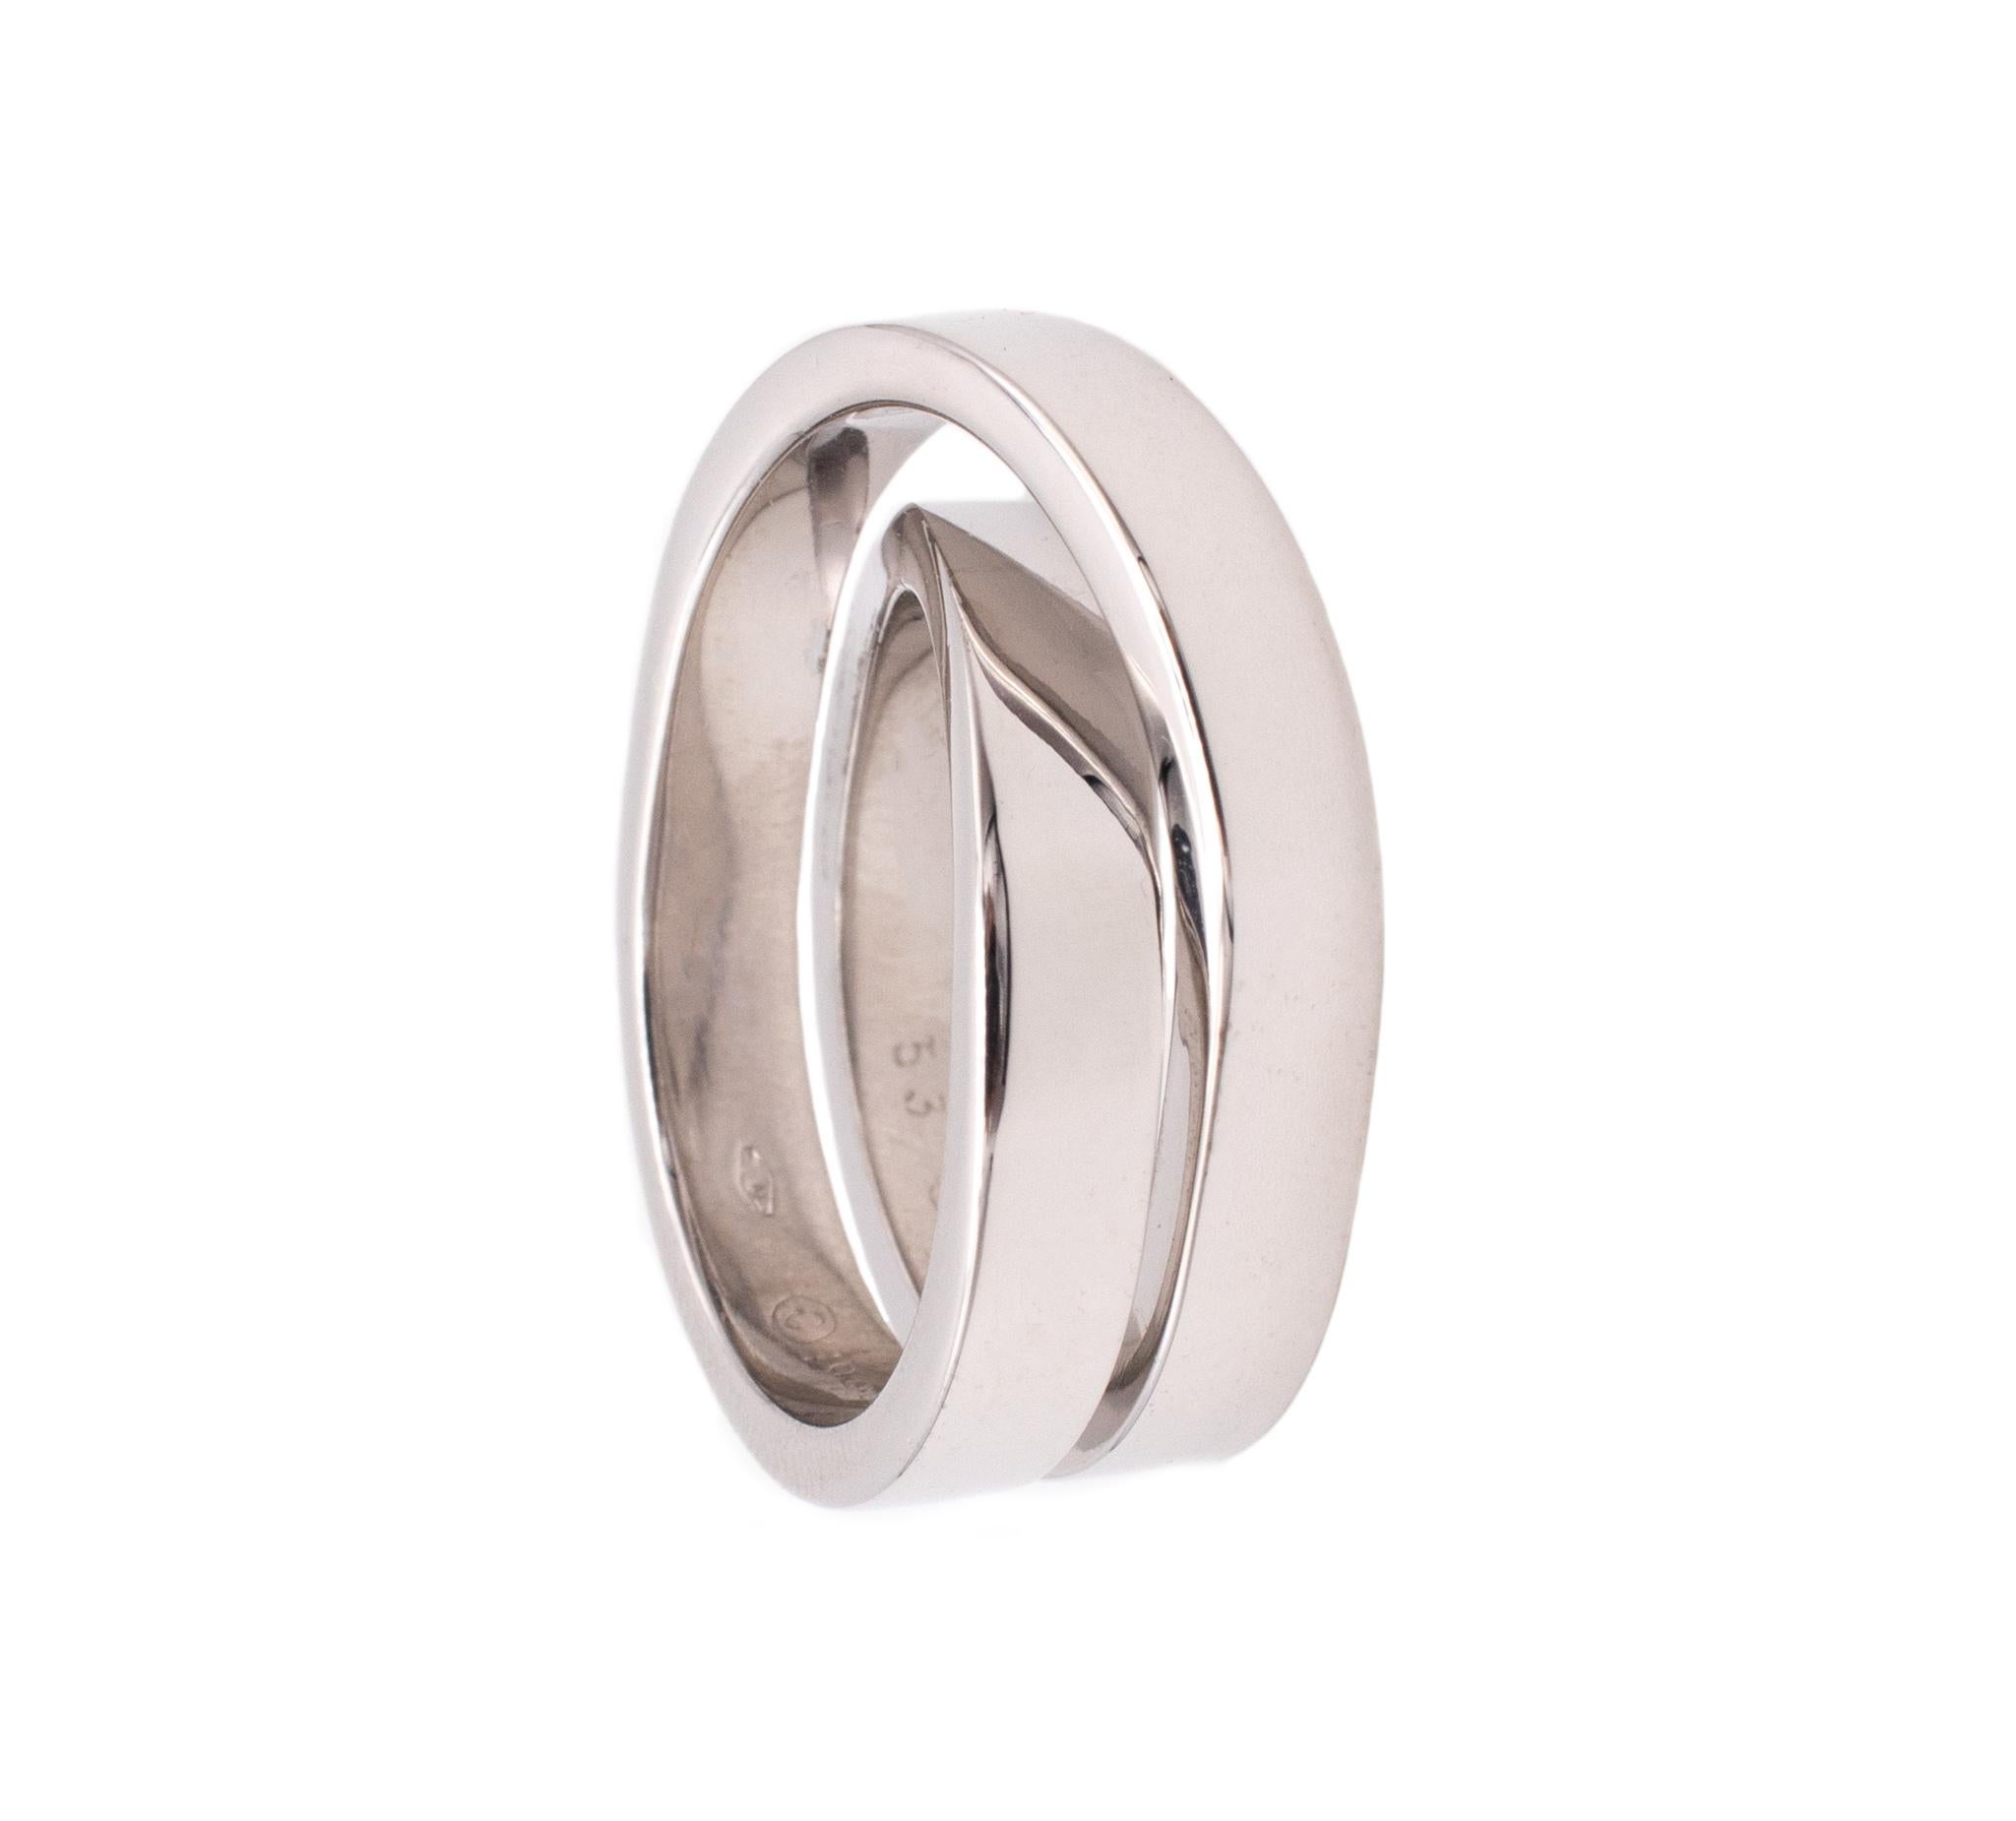 Cartier Paris Modern Nouvelle Bague Twisted Ring in Solid 18Kt White Gold For Sale 1